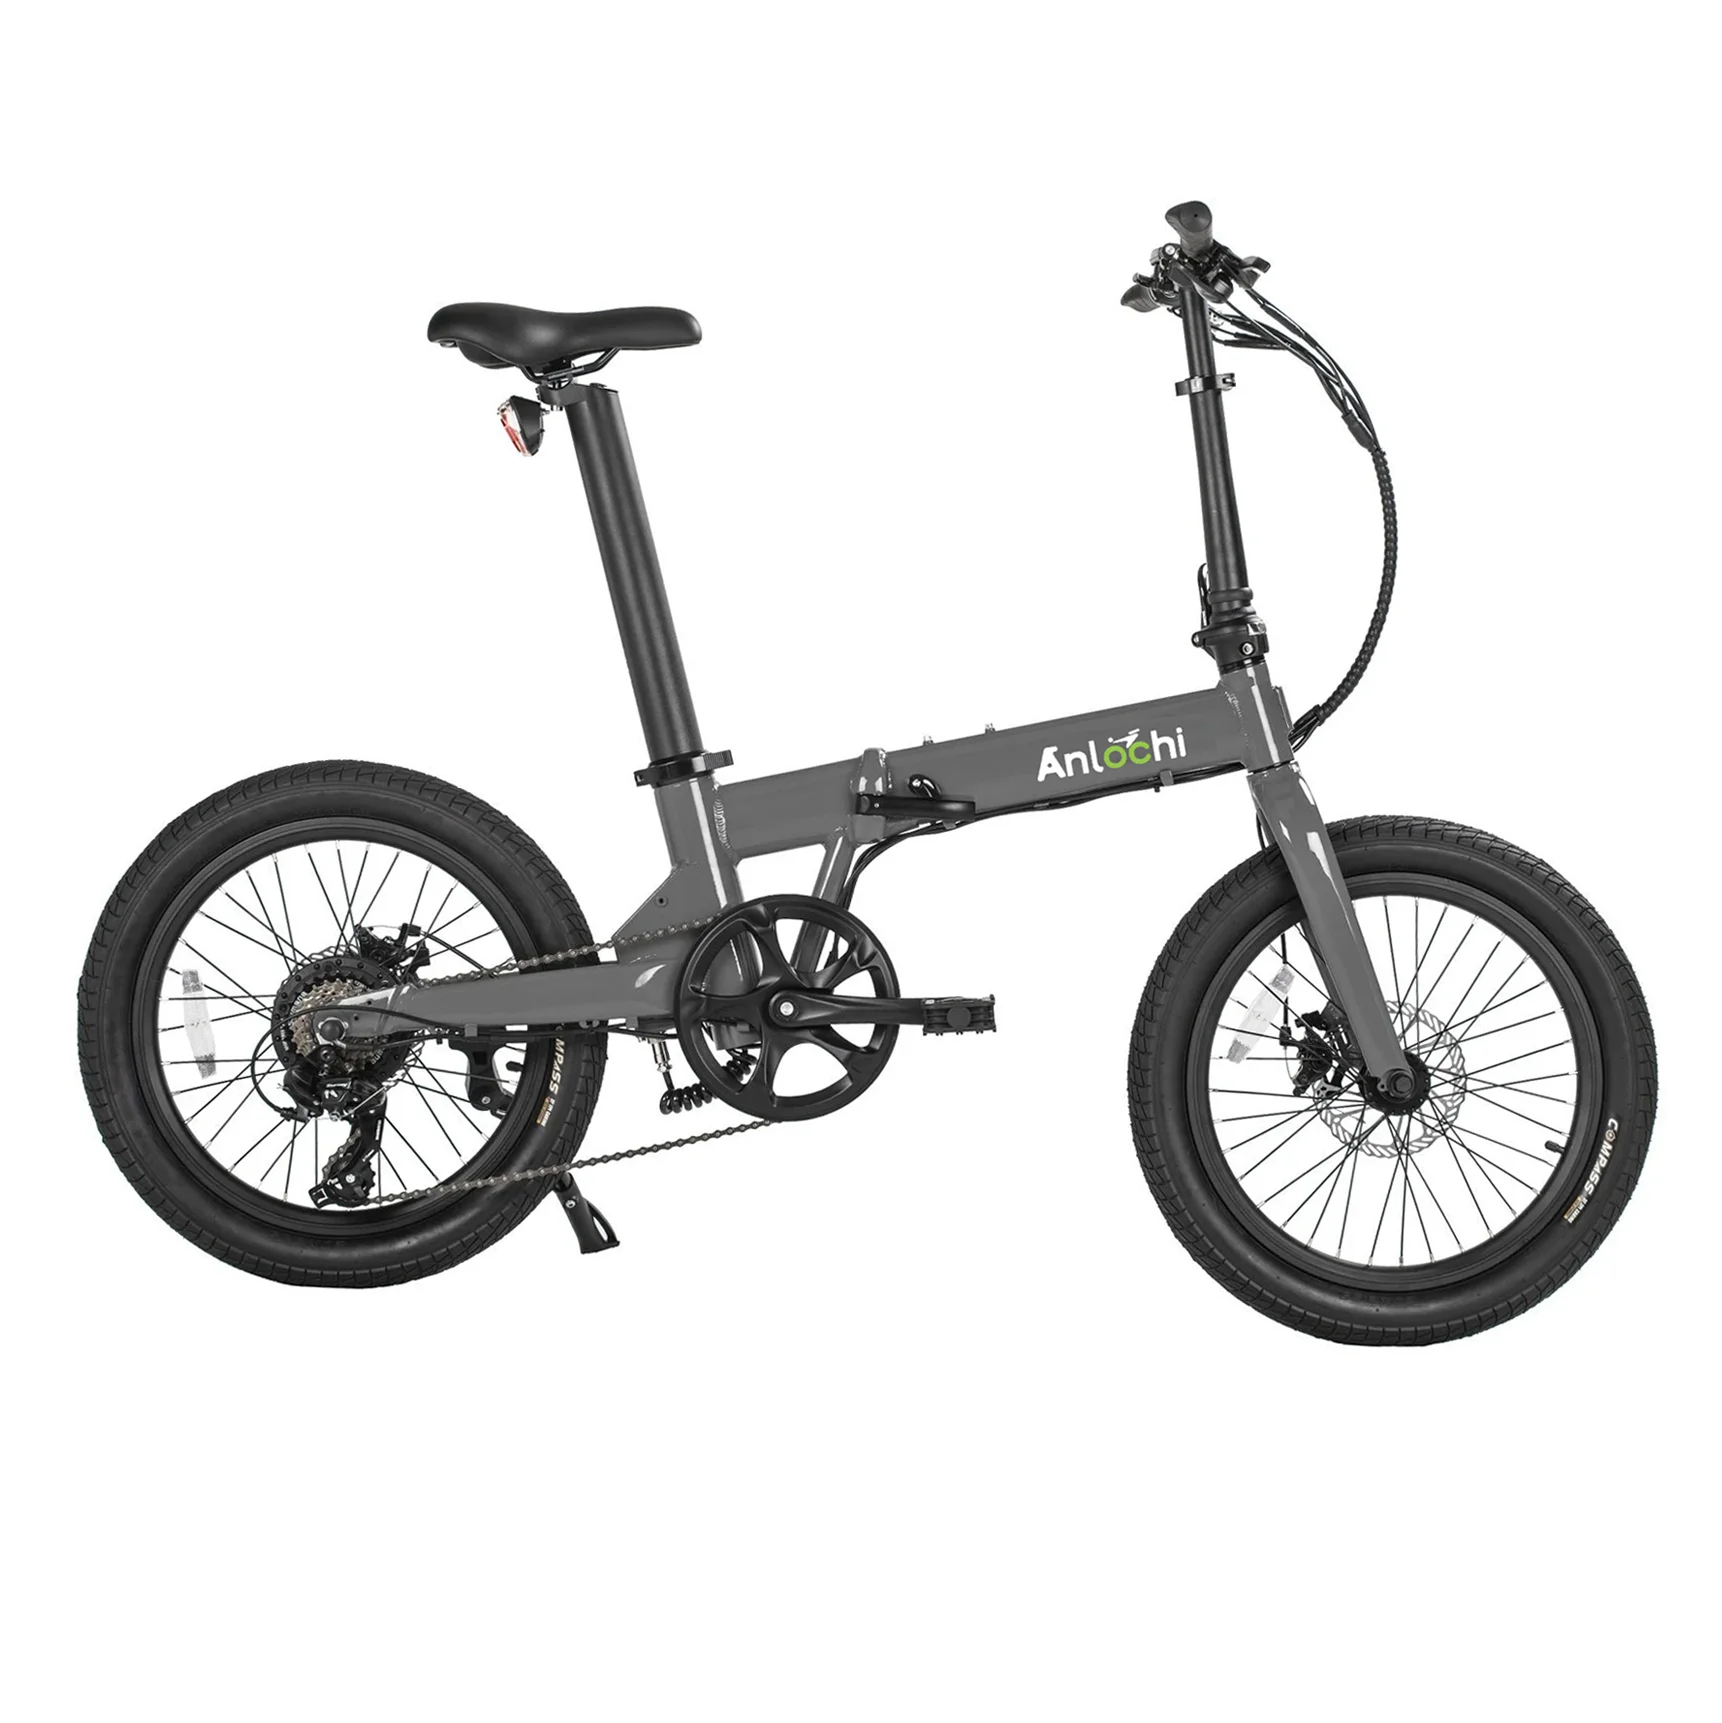 

ANLOCHI cheap price hot sale pedal assist bicycle China factory OEM electric folding urban bike ebike for adult